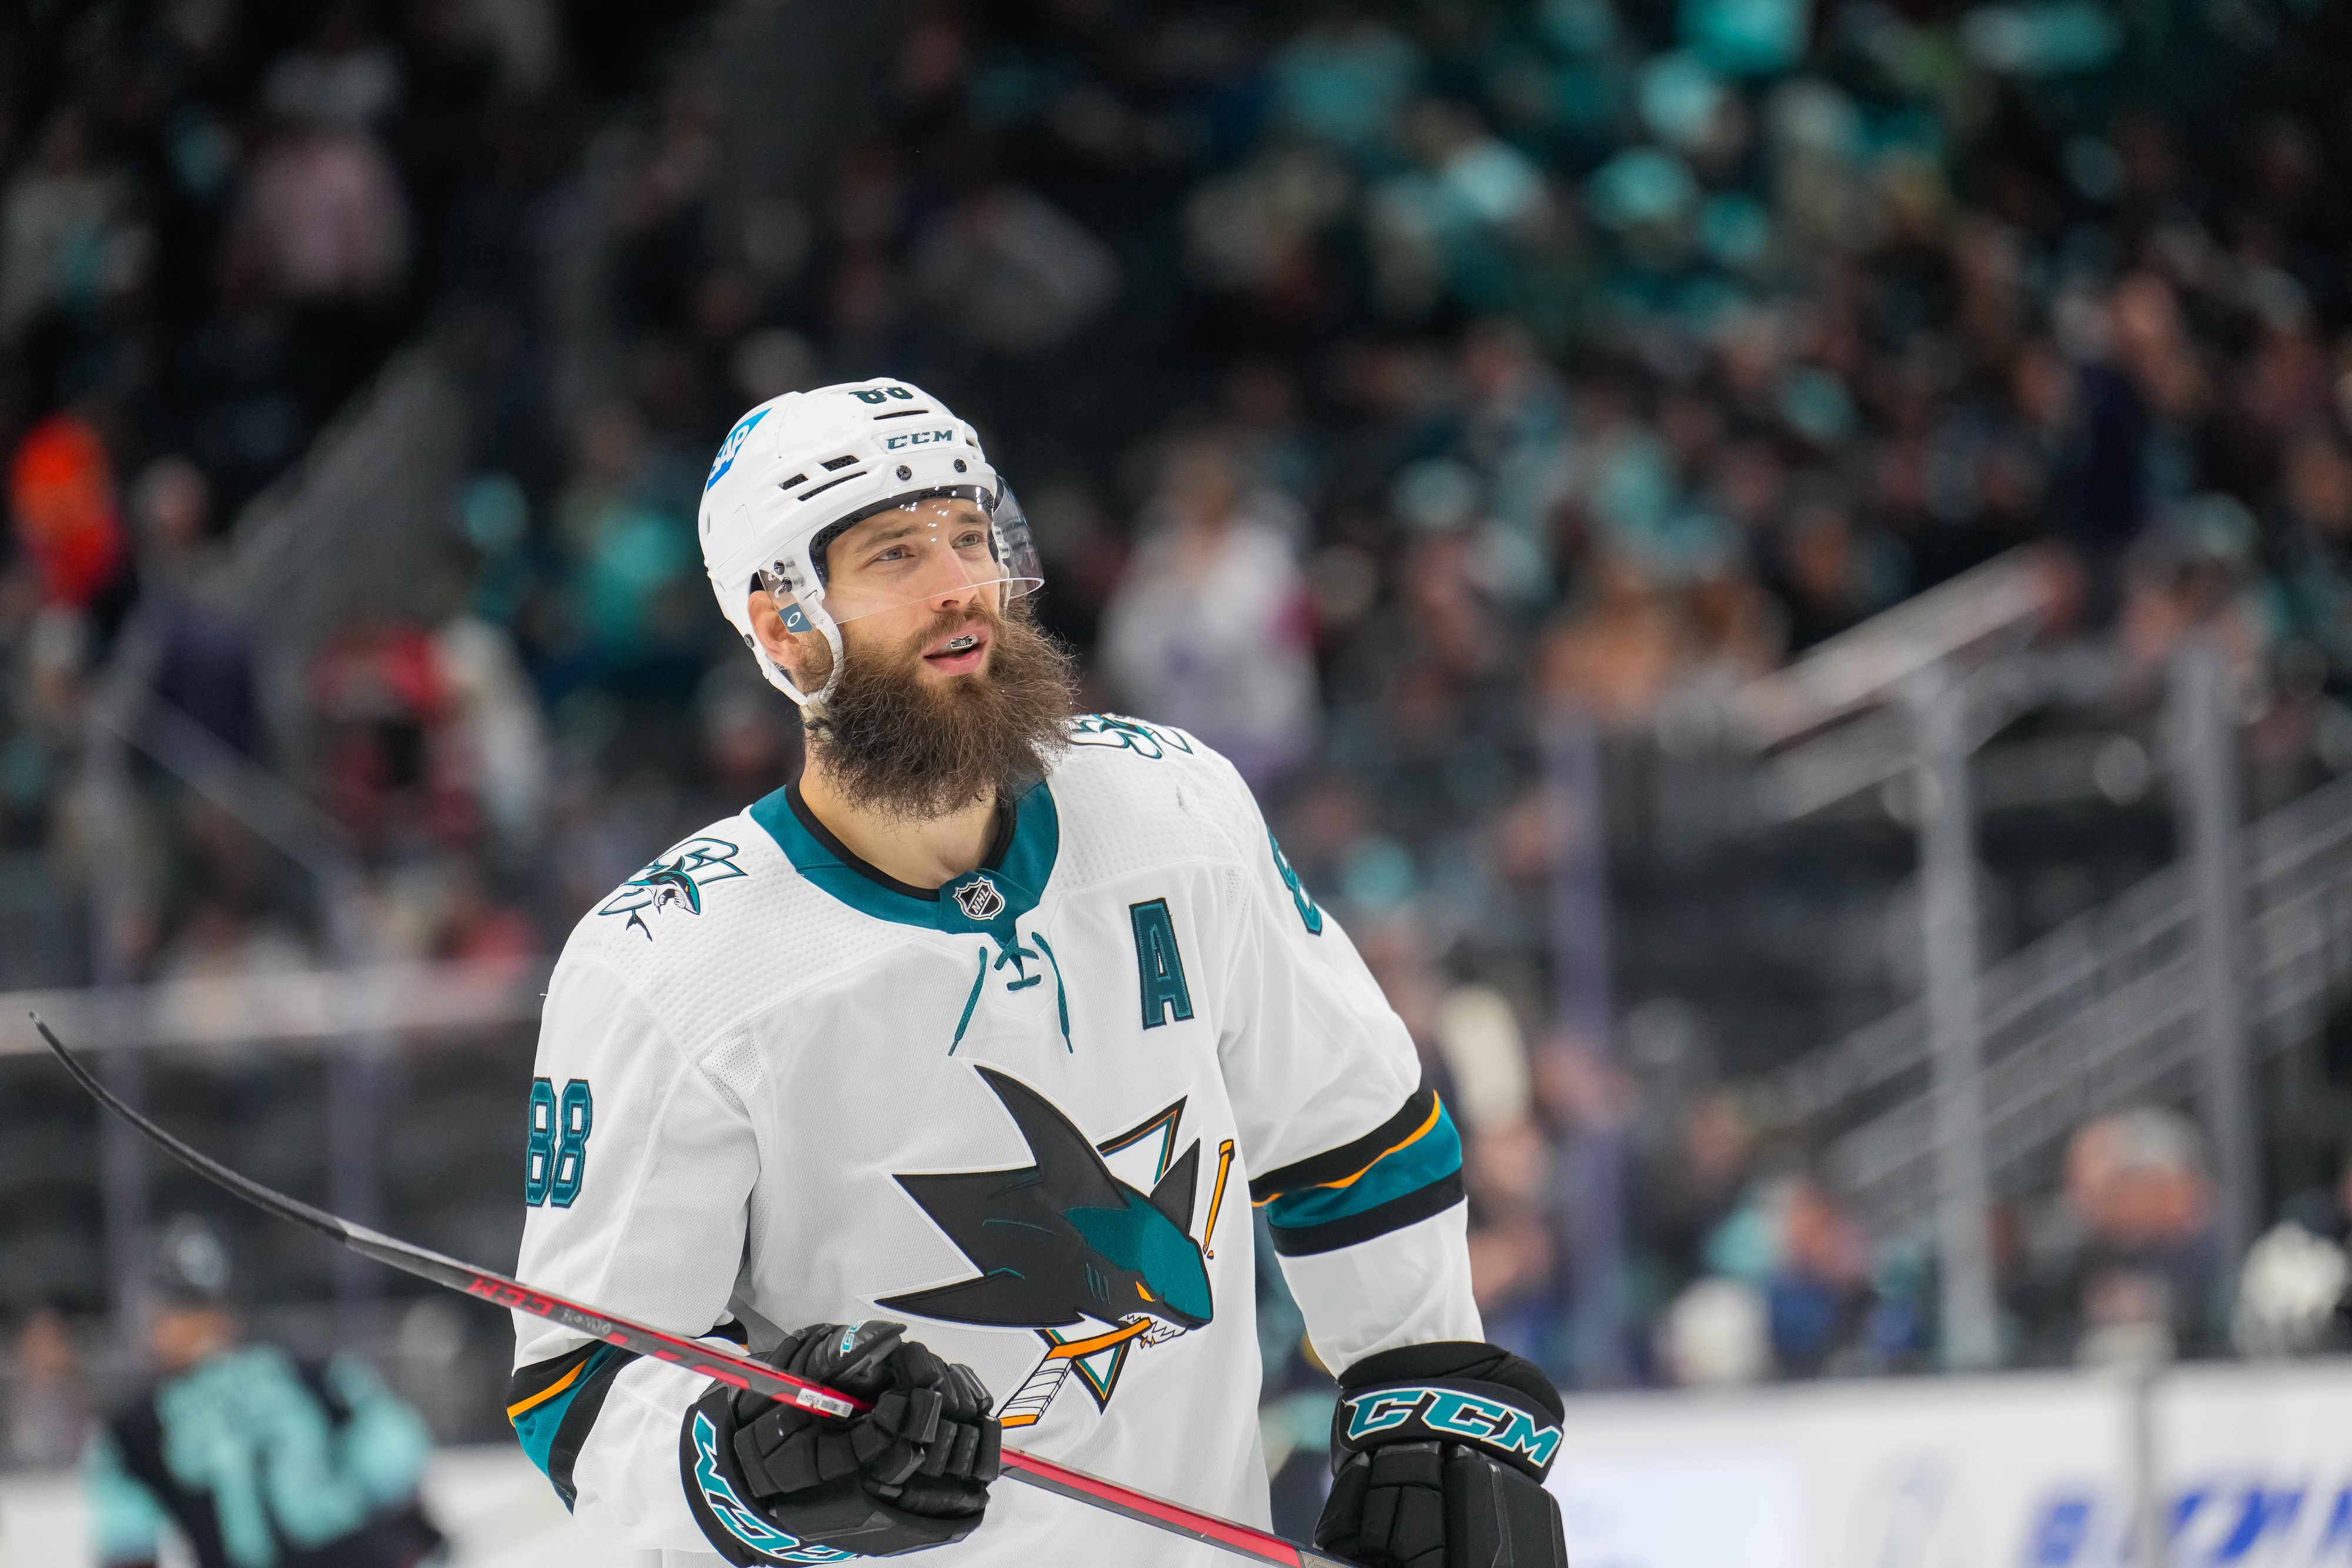 Brent Burns #88 of the San Jose Sharks looks up at the scoreboard during a stoppage in the second period of a game against the Seattle Kraken at Climate Pledge Arena on April 29, 2022 in Seattle, Washington.